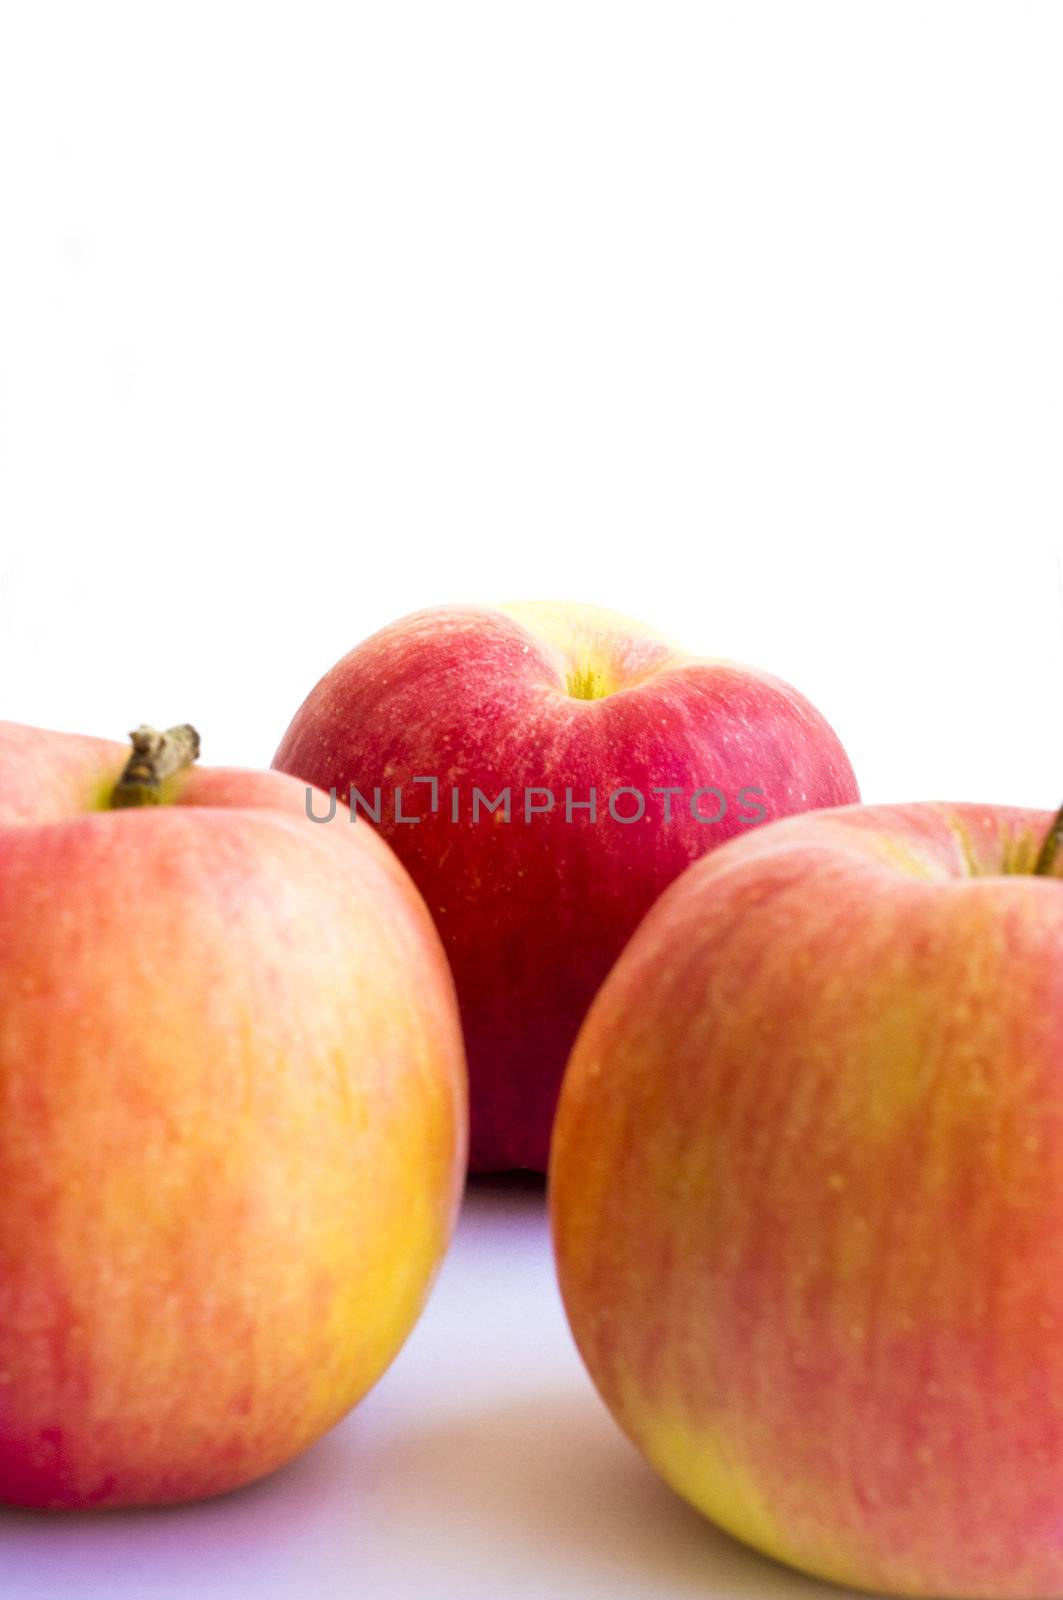 Apples by photo4dreams